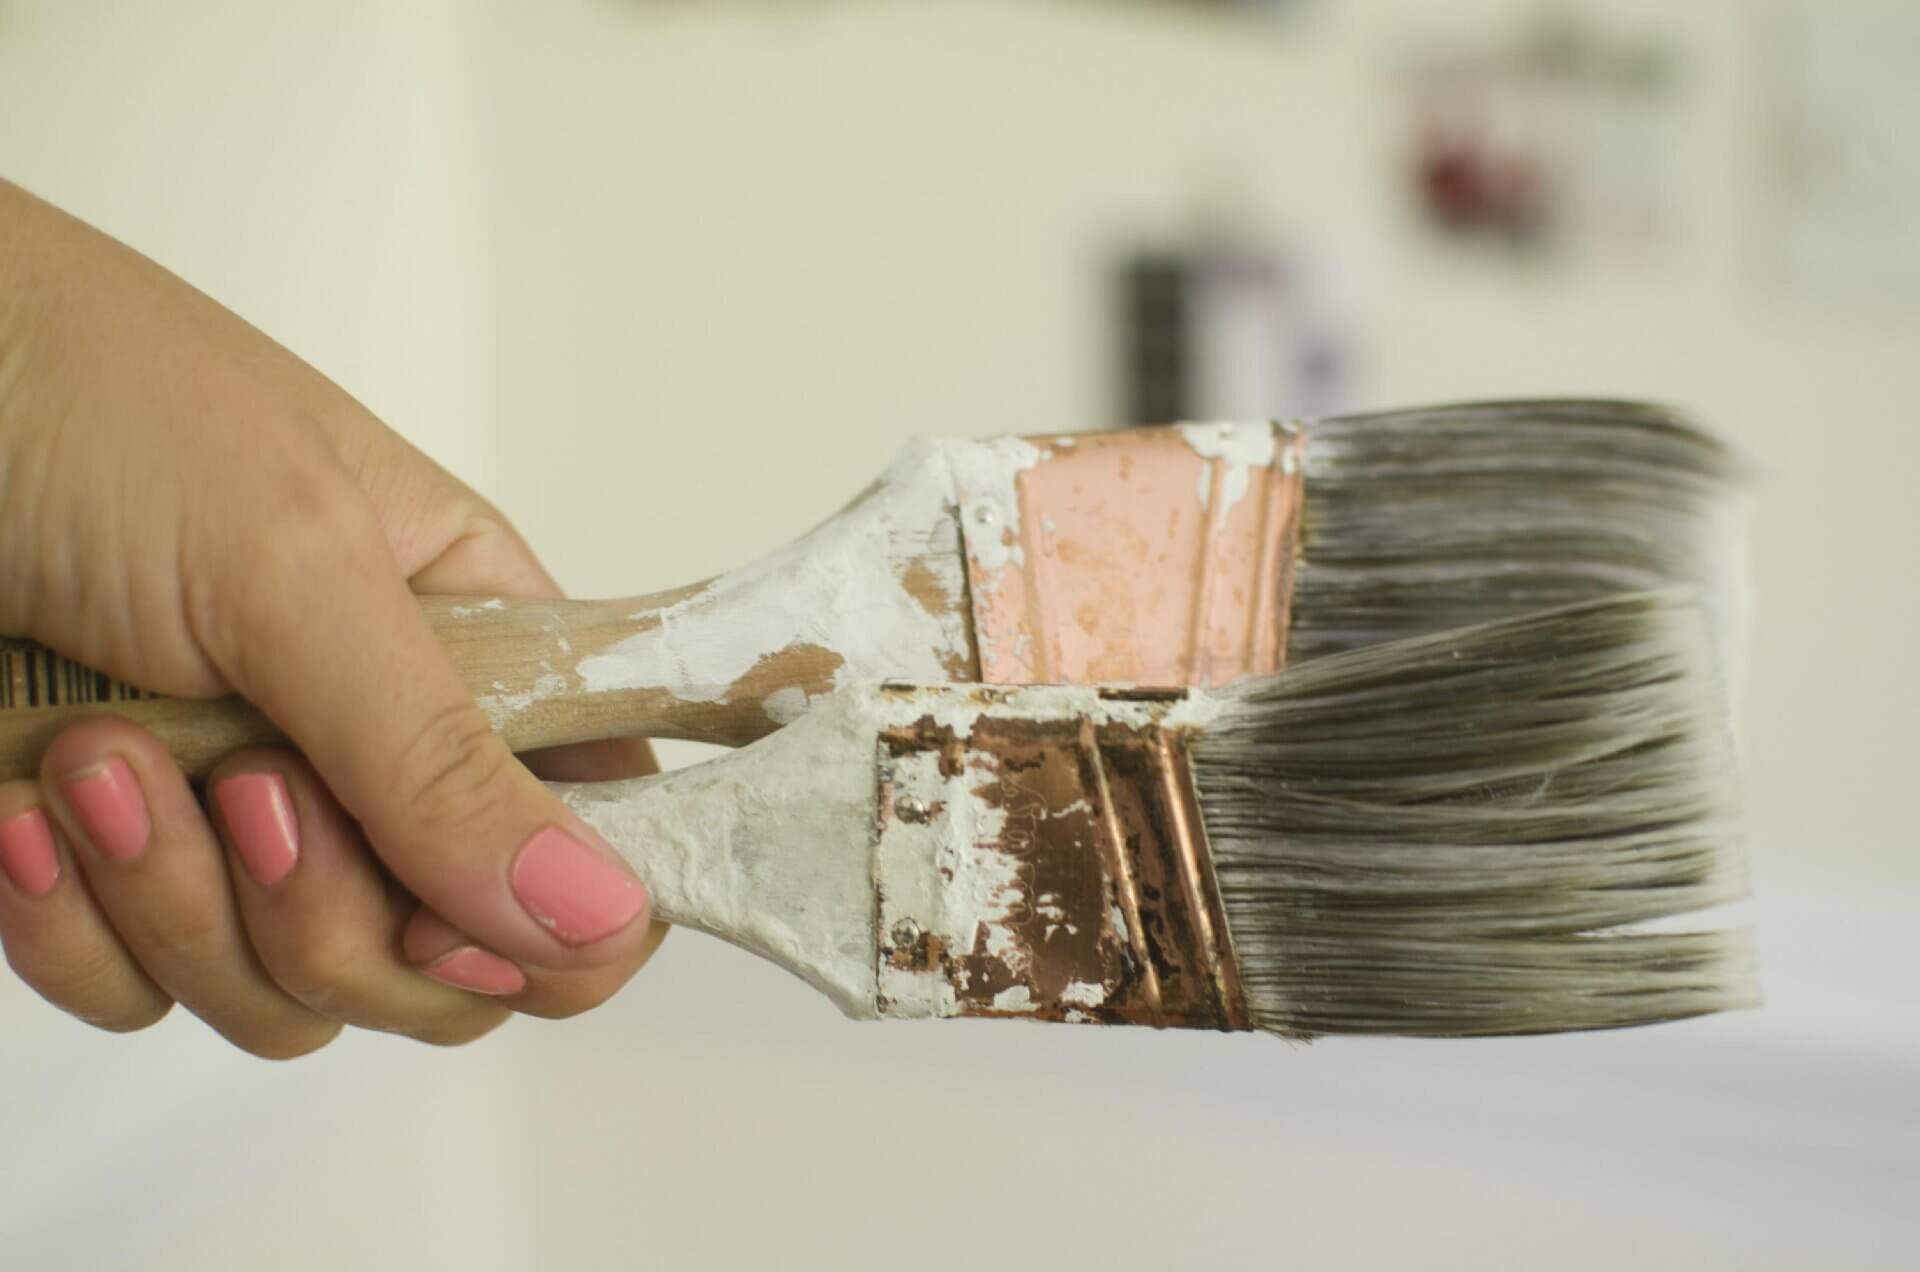 Cleaning paint brushes